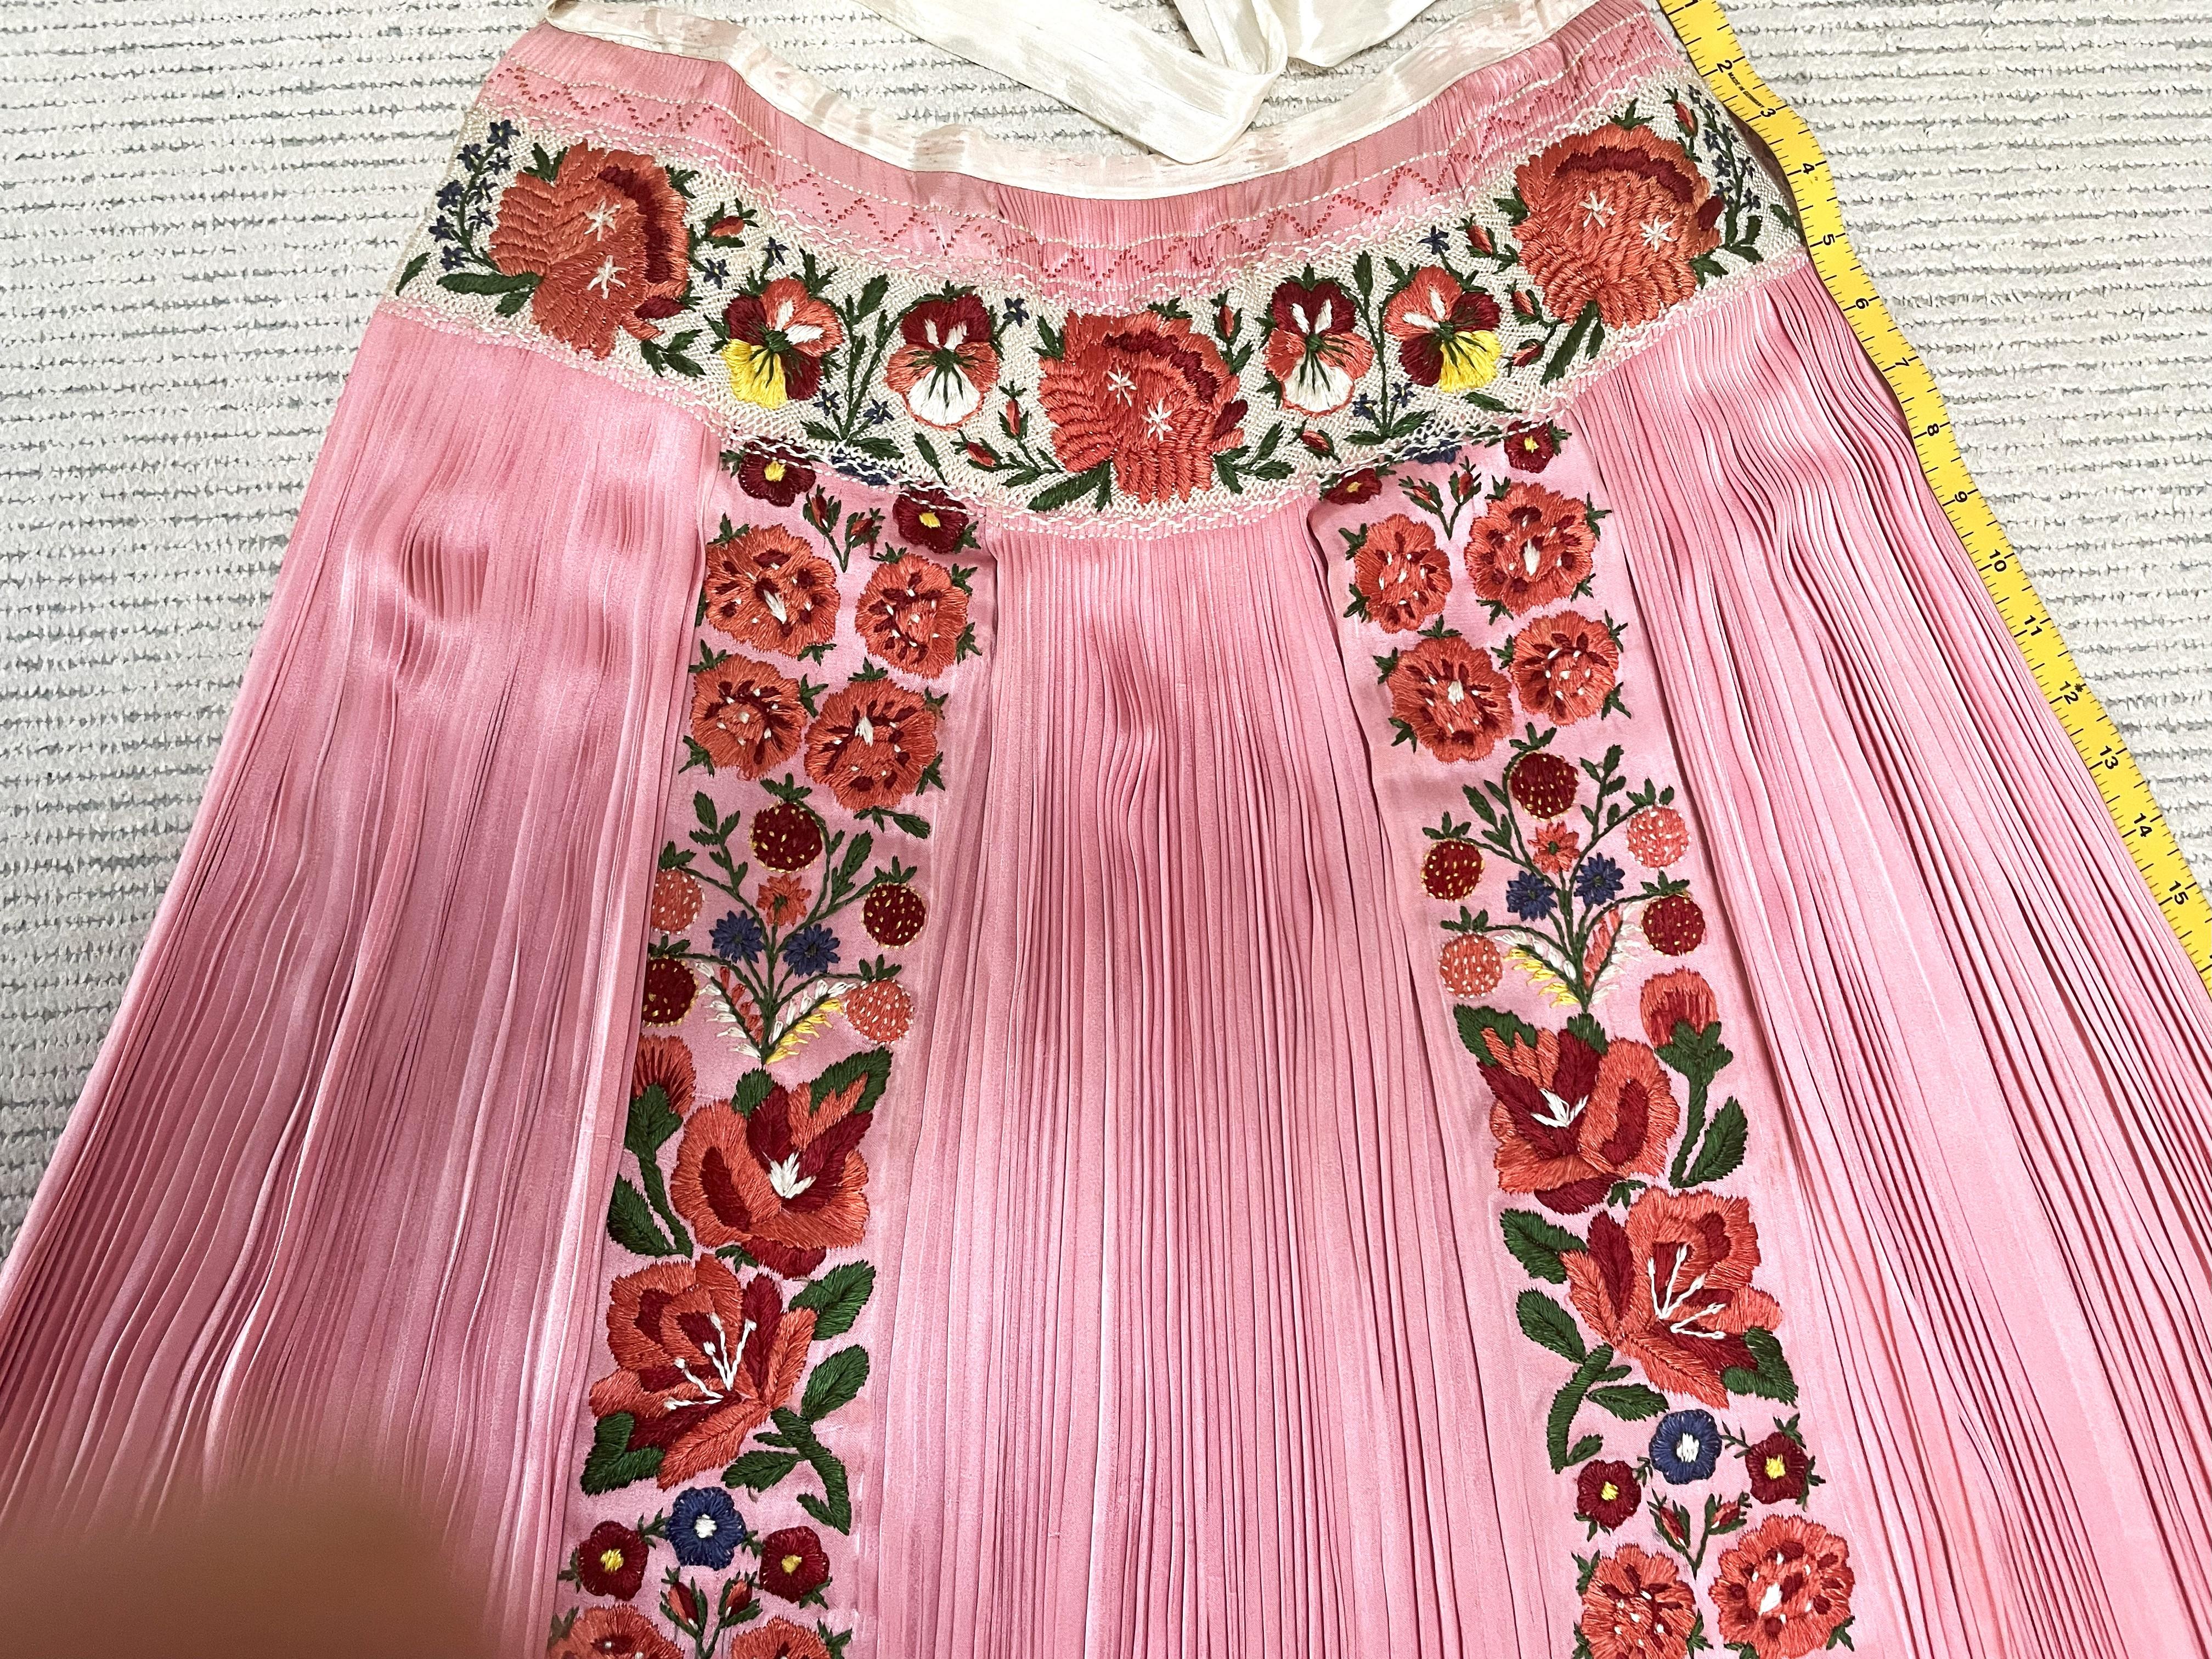 Women's Hungarian traditional Apron, embroiderd by hand in the 1950s, Hungary